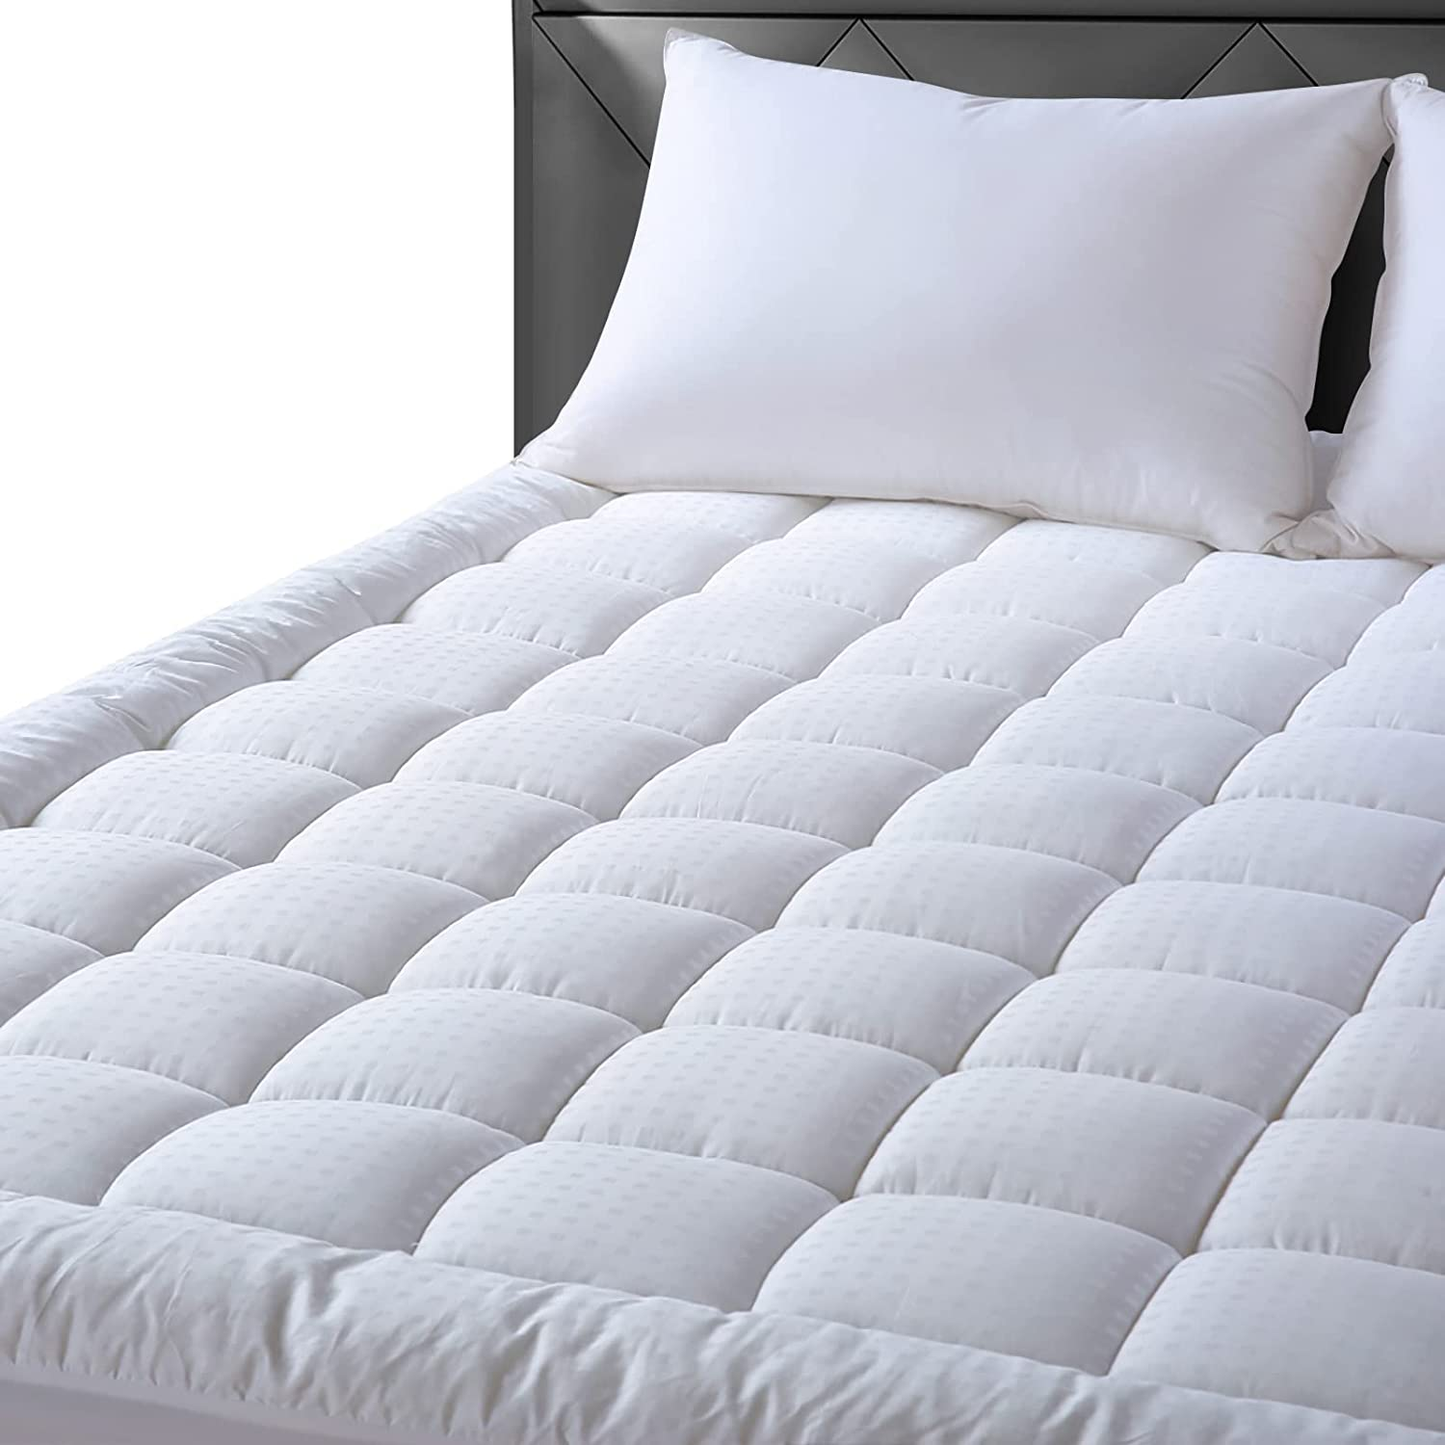  Twin Size Mattress Pad Pillow Top Mattress Cover Quilted Fitted Mattress Protector Single Cotton Top 8-21" Deep Pocket Cooling Mattress Topper (39X75 Inches, White)